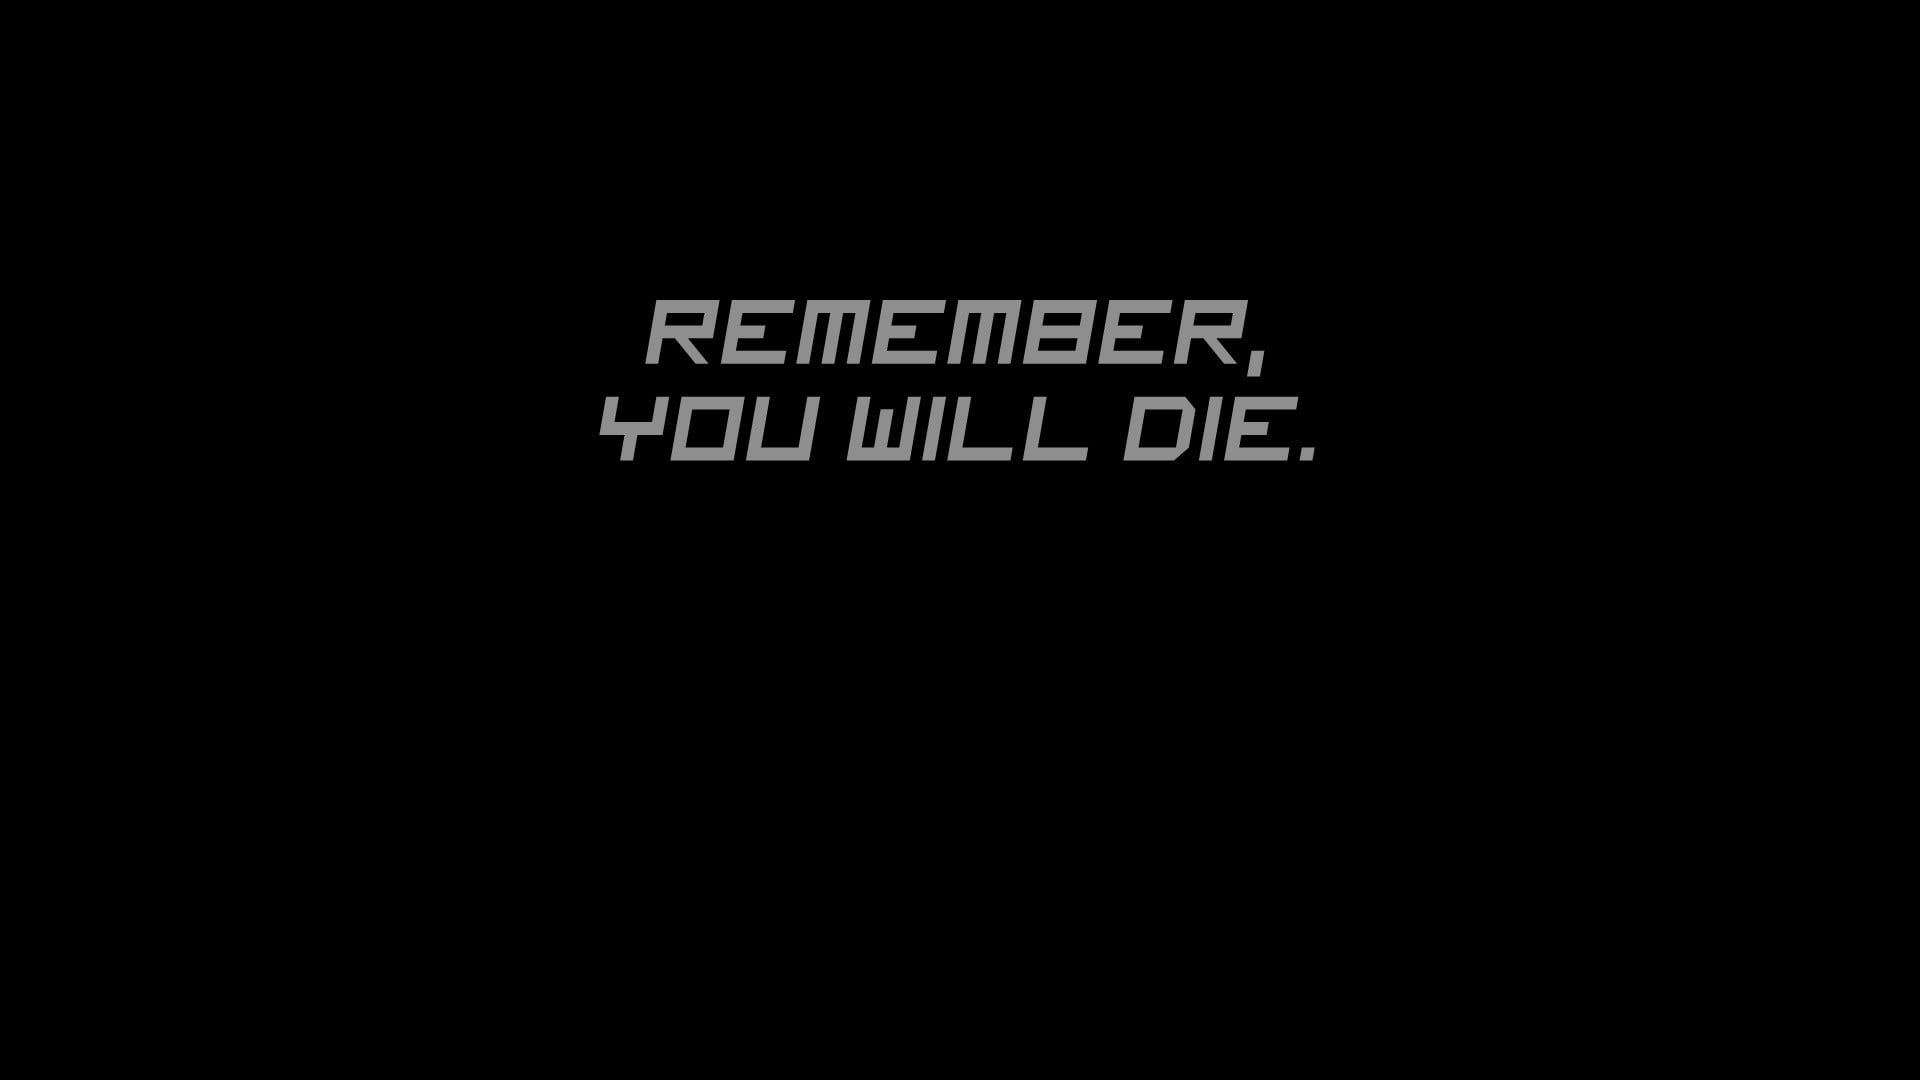 black background with remember, you will die text overlay, minimalism